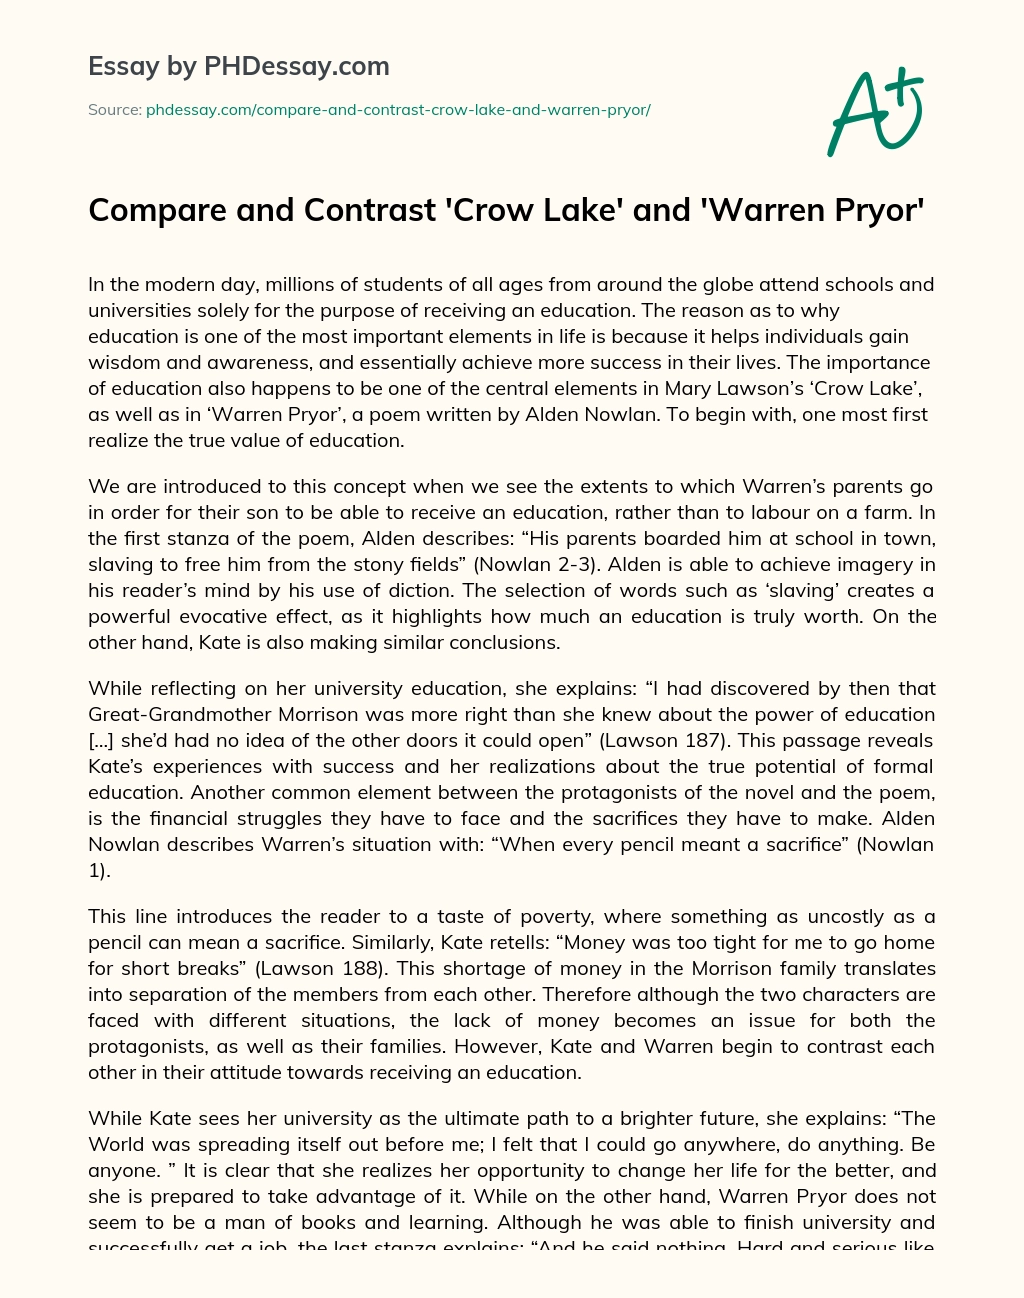 Compare and Contrast ‘Crow Lake’ and ‘Warren Pryor’ essay